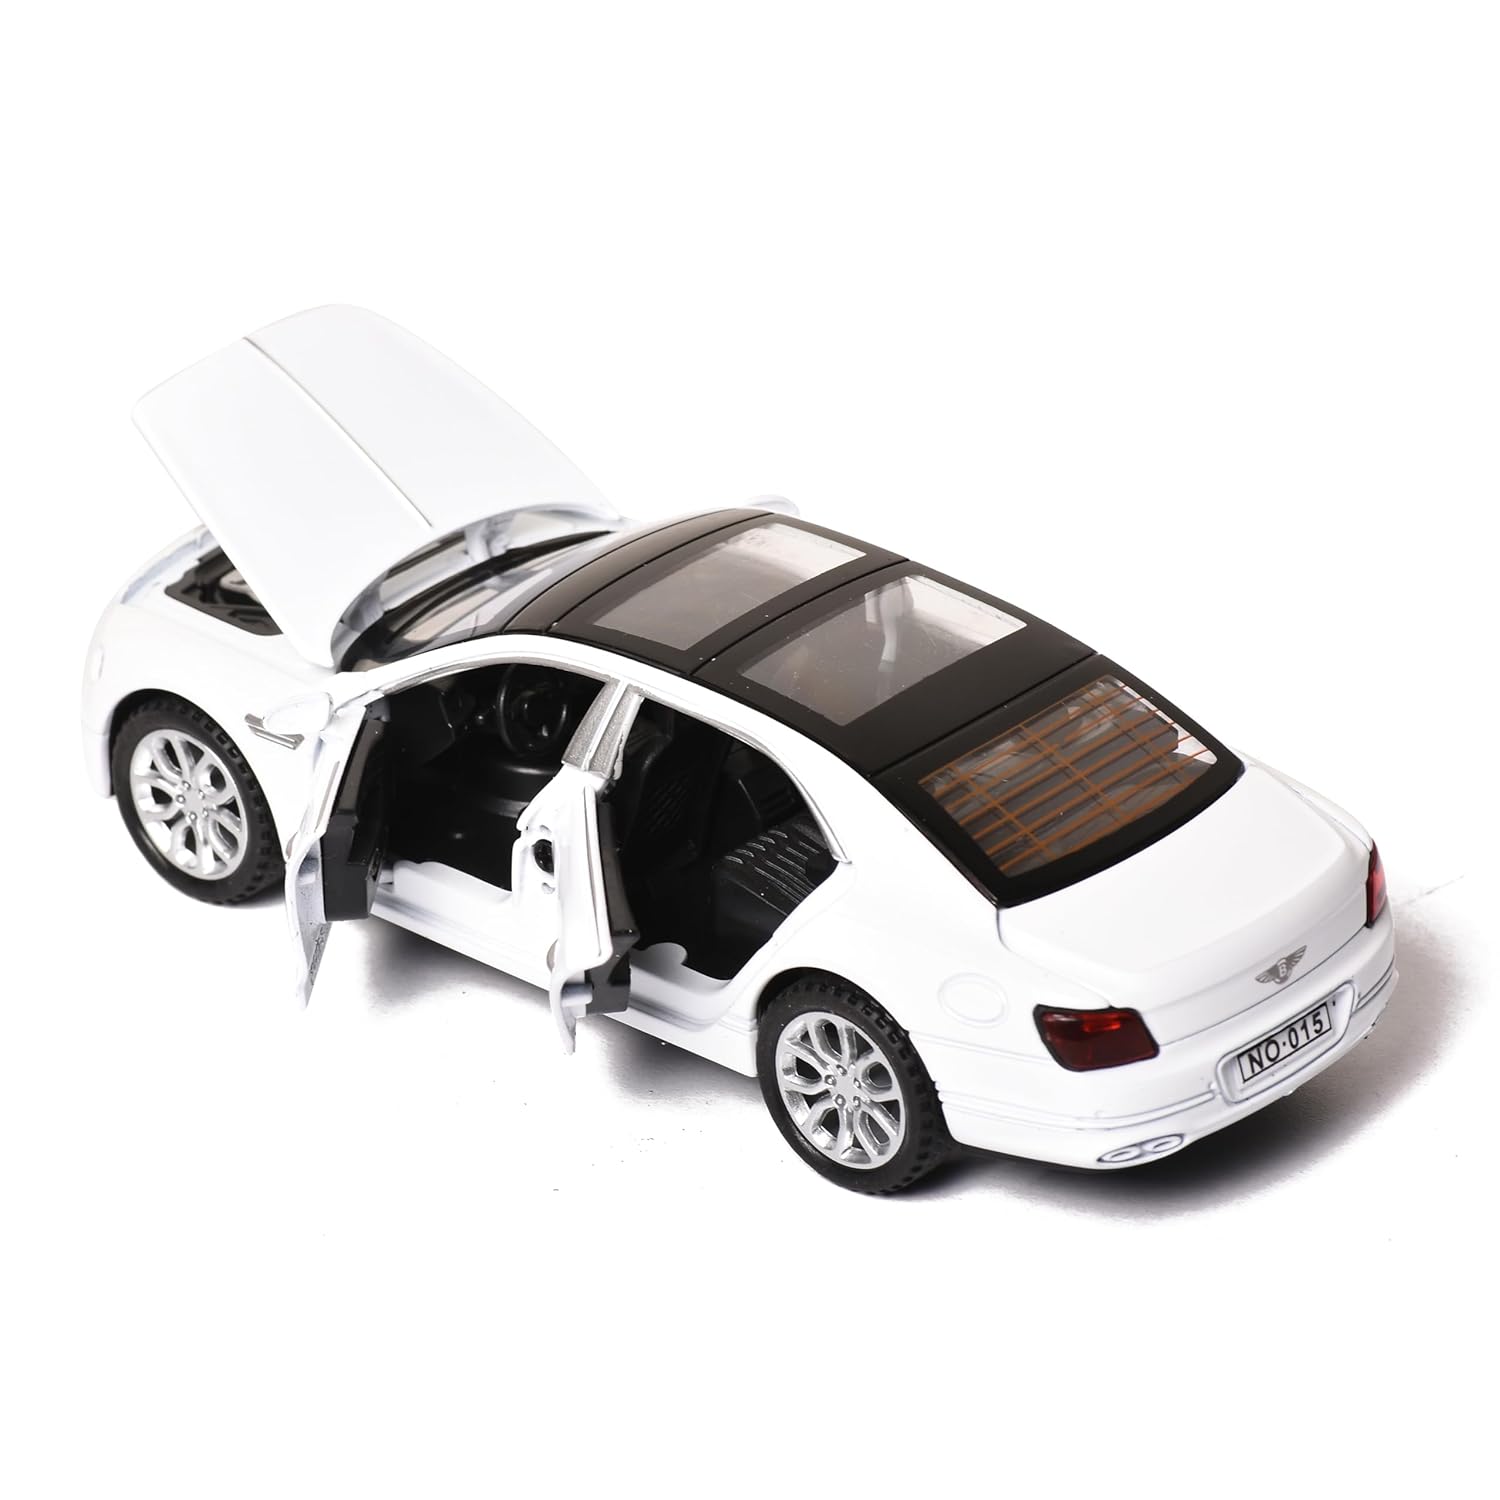 Braintastic Model Diecast Car Toy Vehicle Pull Back Friction Car with Openable Doors Light & Music Toys for Kids Age 3+ Years (AK Metal Series Bentley White)